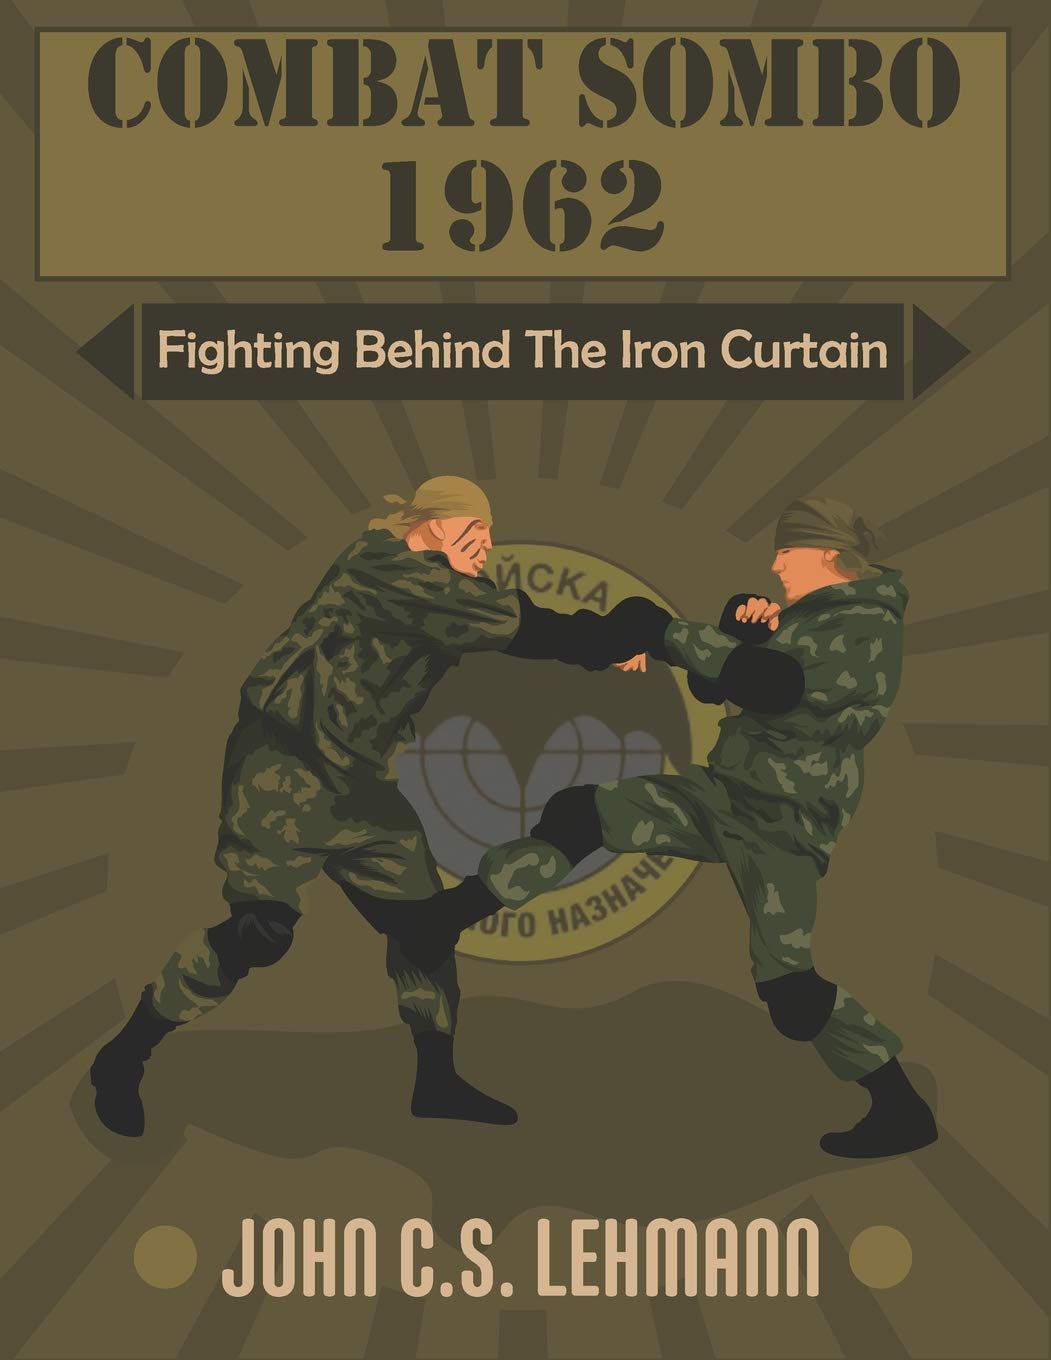 Combat Sombo 1962: Fighting Behind The Iron Curtain Book by Hohn Lehmann - Budovideos Inc